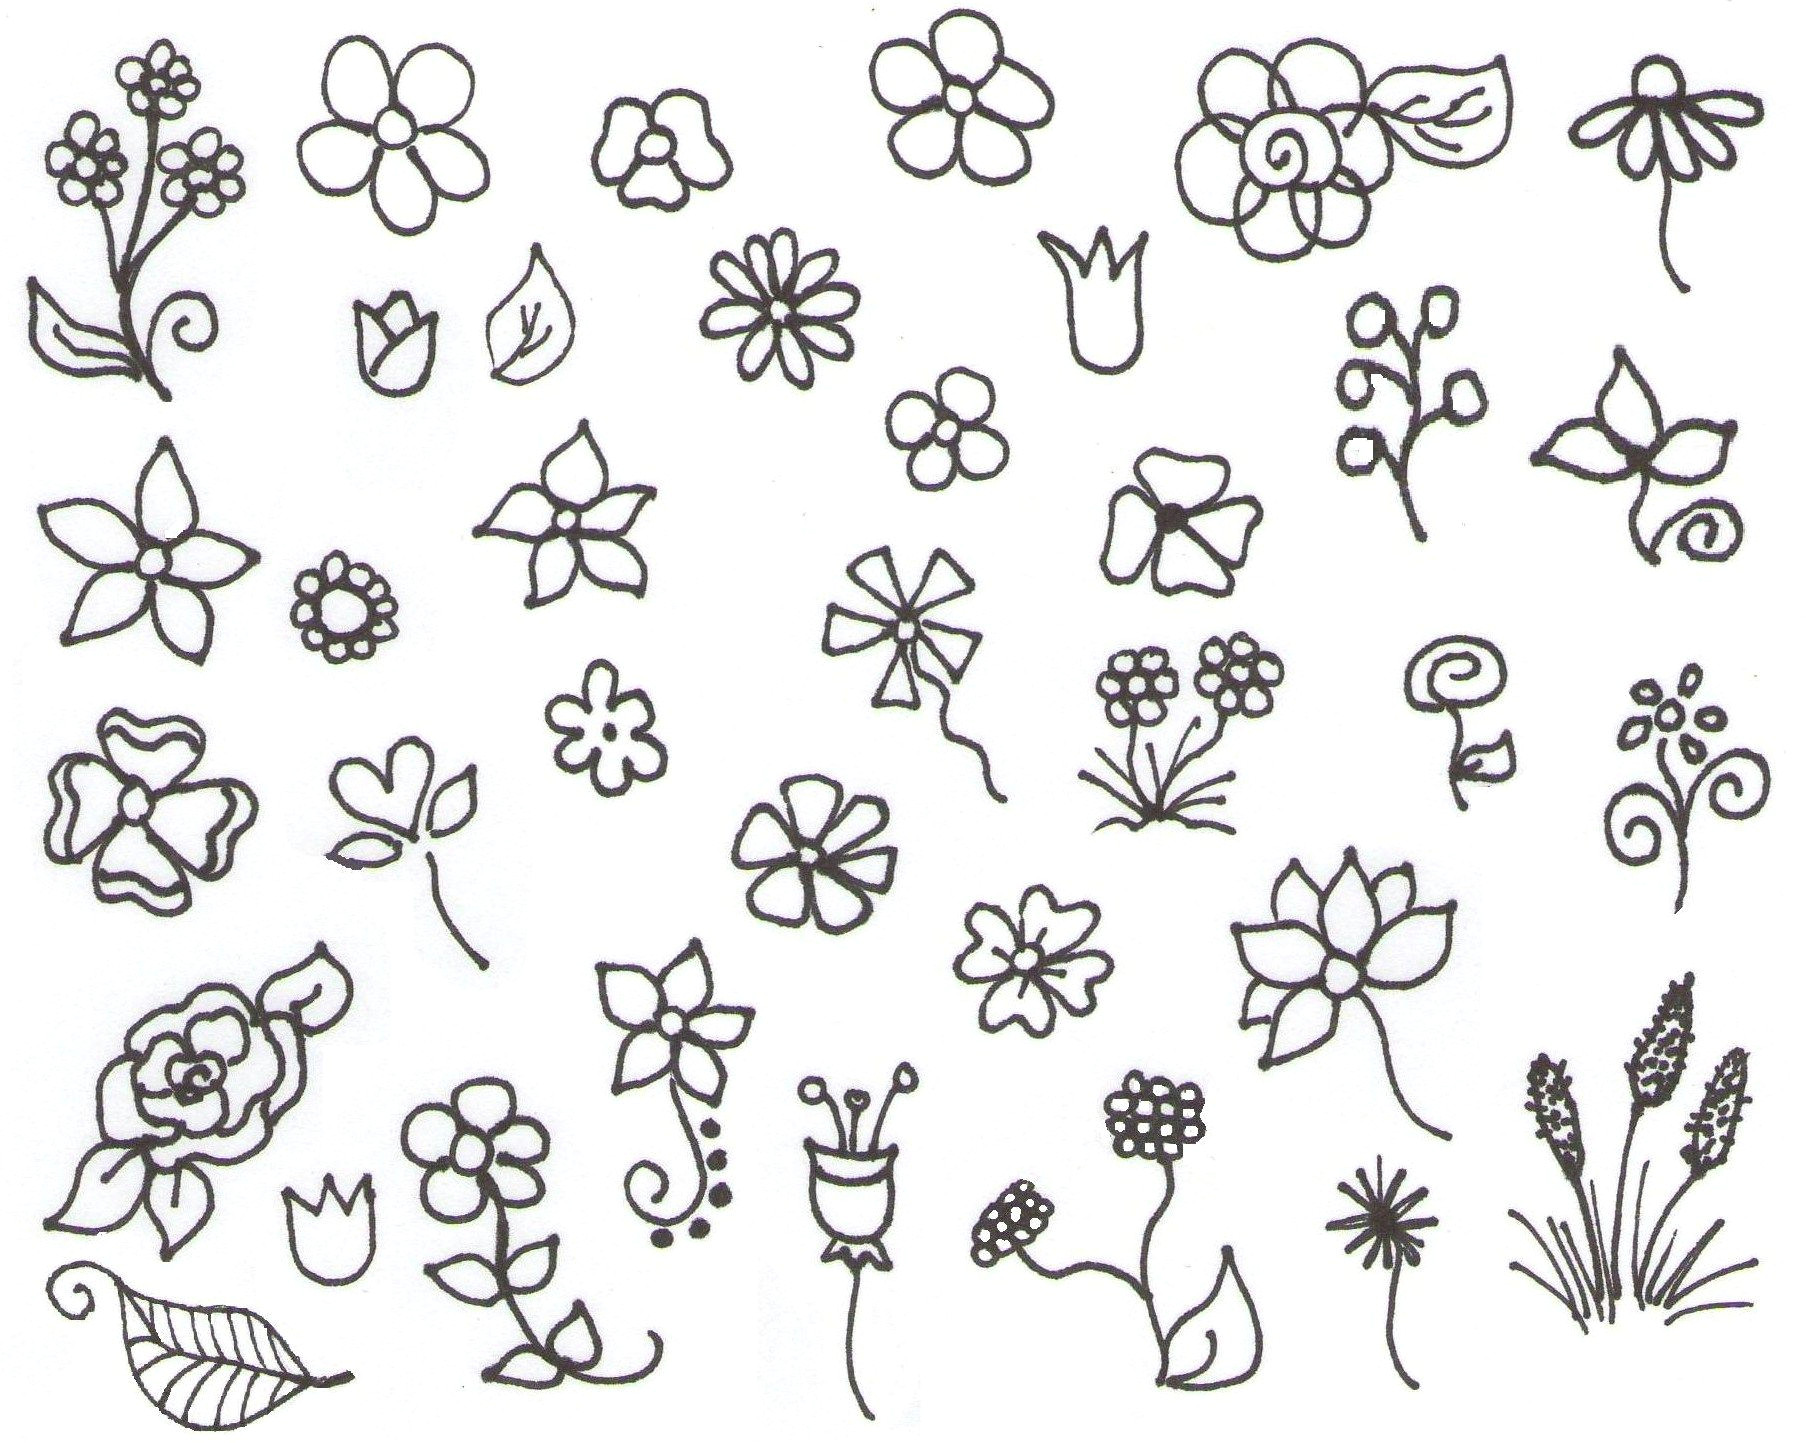 Easy Drawings Patterns My Inspiration Flower Doodles Drawing Flower Doodles Doodles